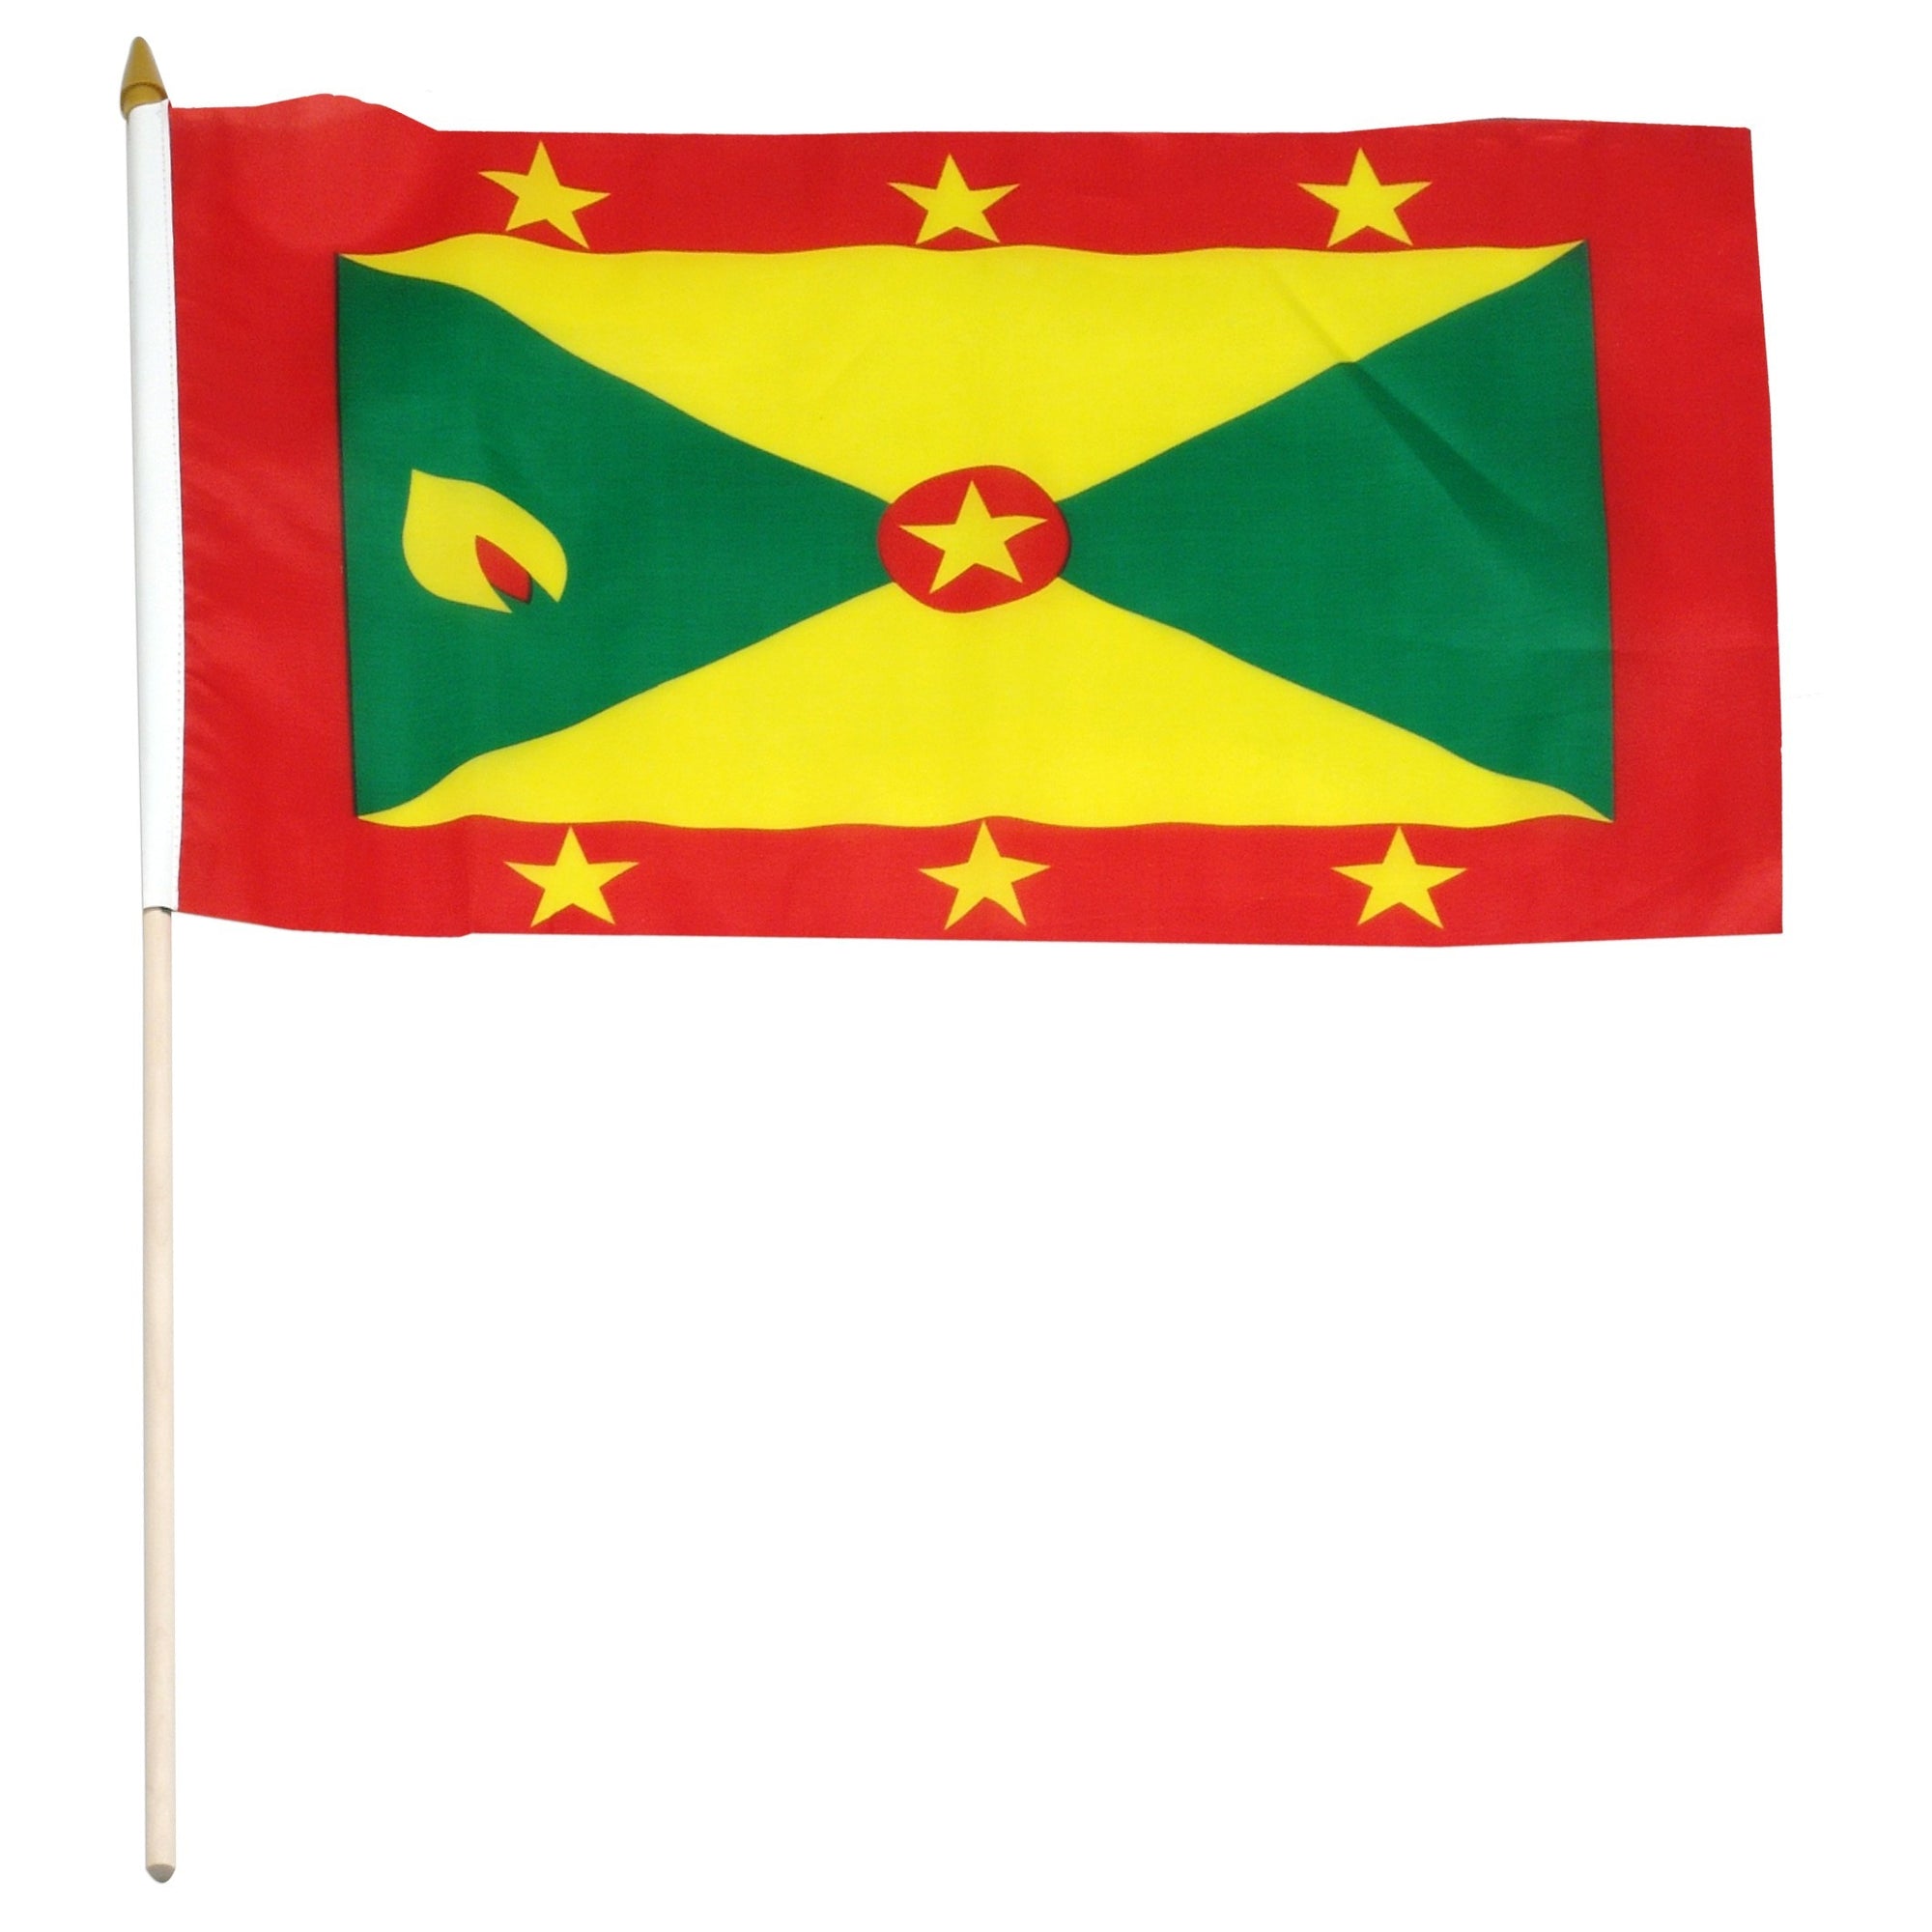 Grenada flags for sale 1-800 flags